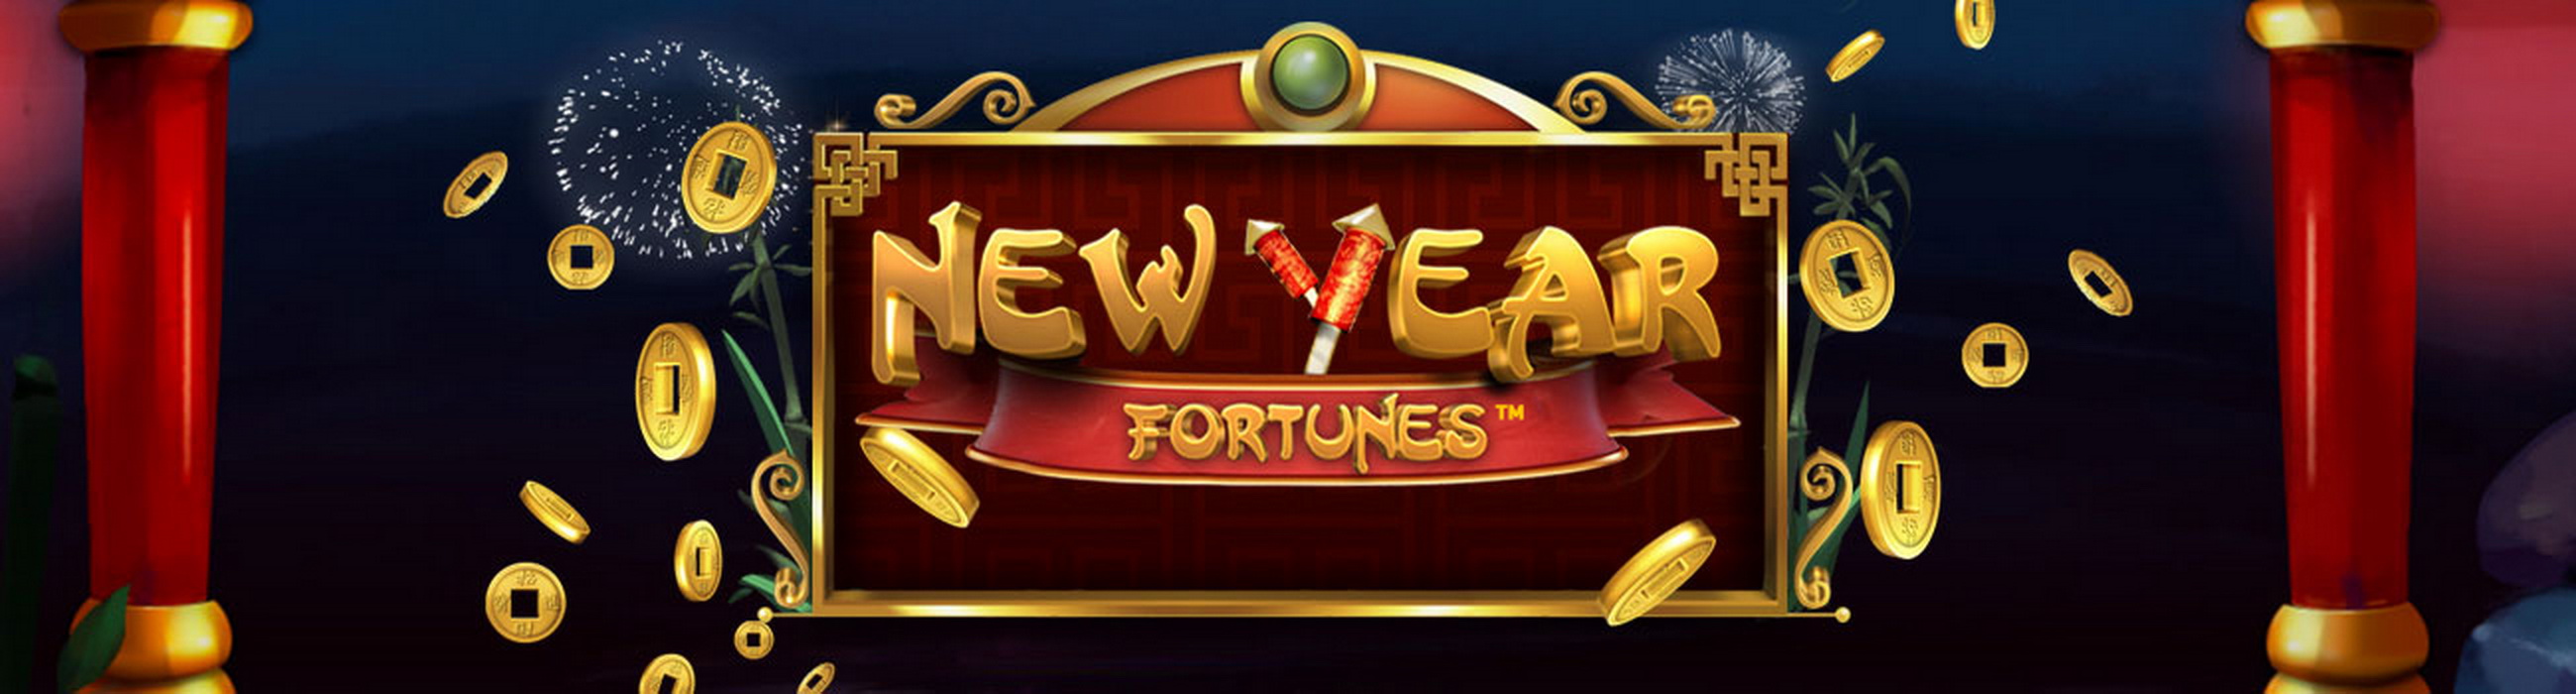 New Year Fortunes demo